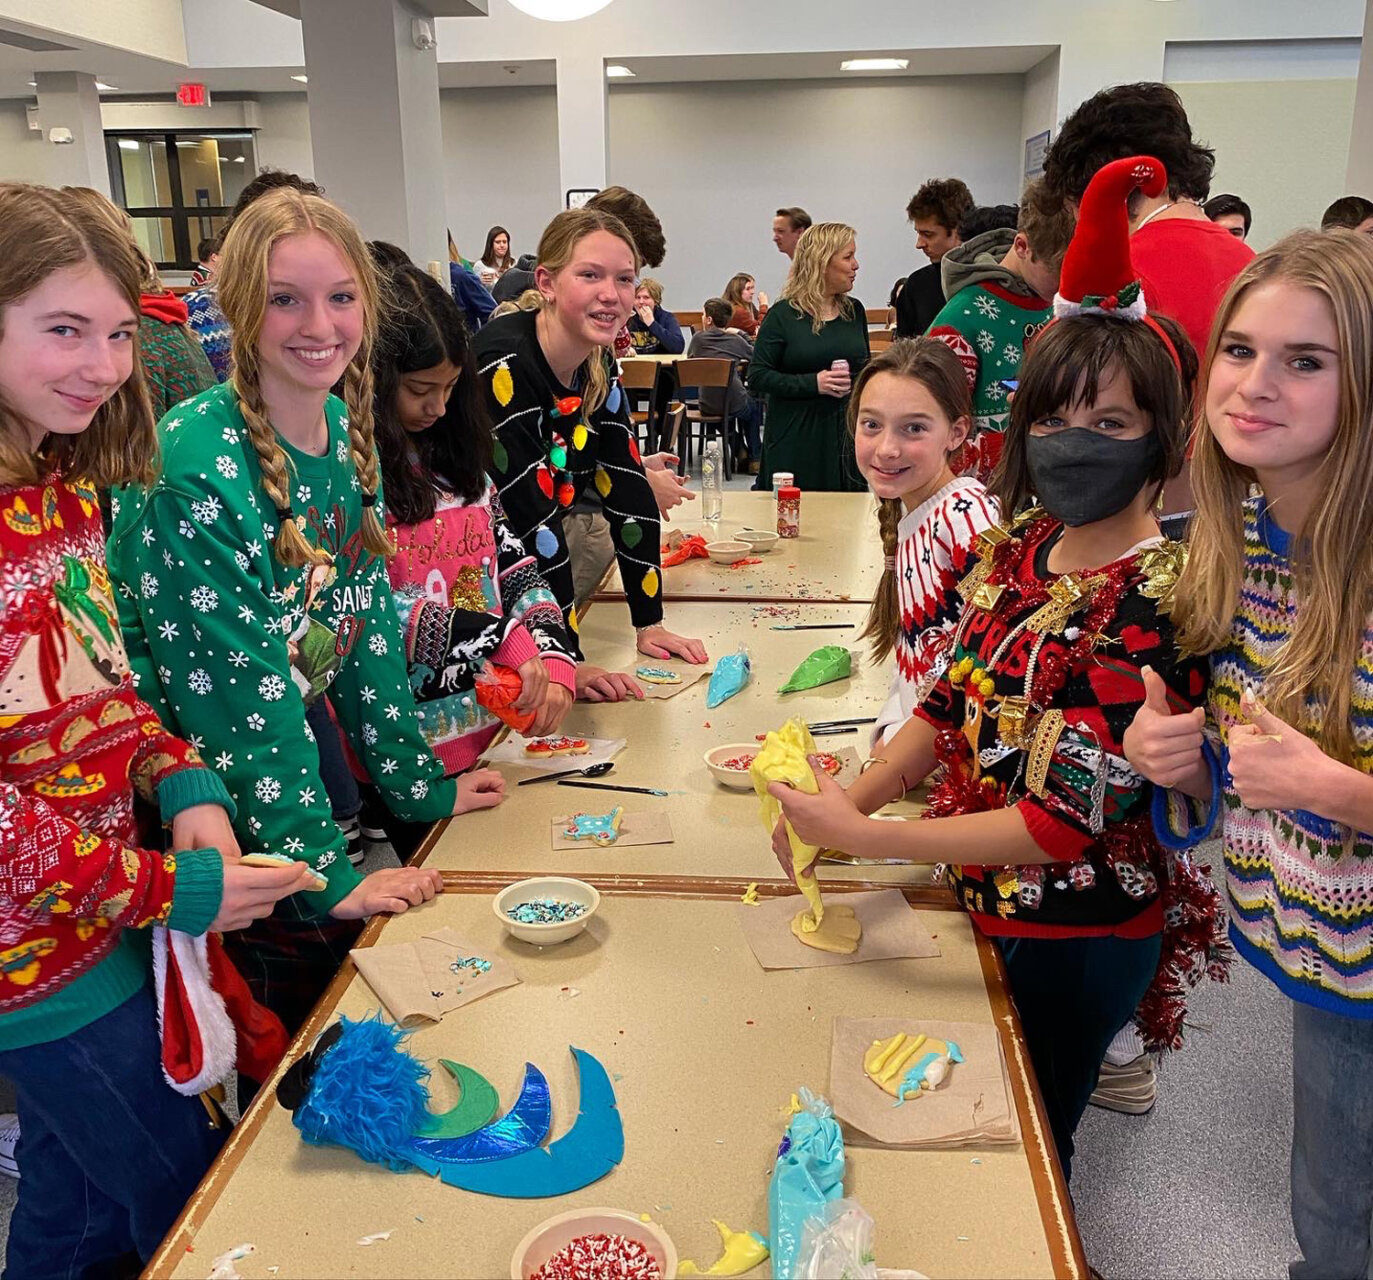 Williams School students decorating cookies during the holidays while wearing festive sweaters